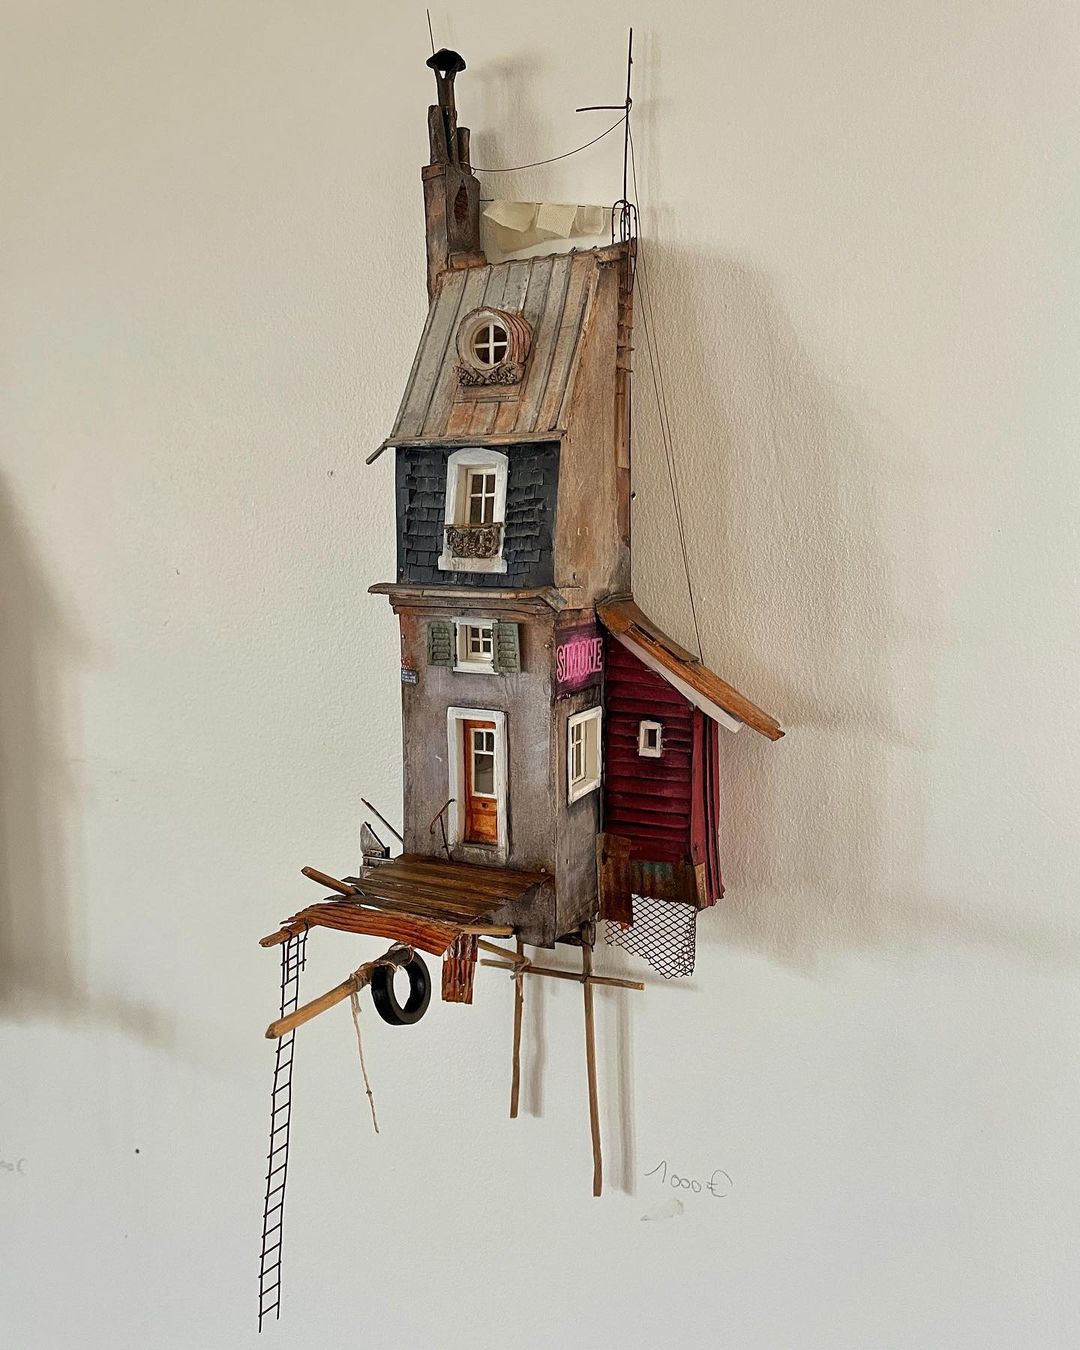 Miniature Ramshackle Cabins By David Mansot (19)